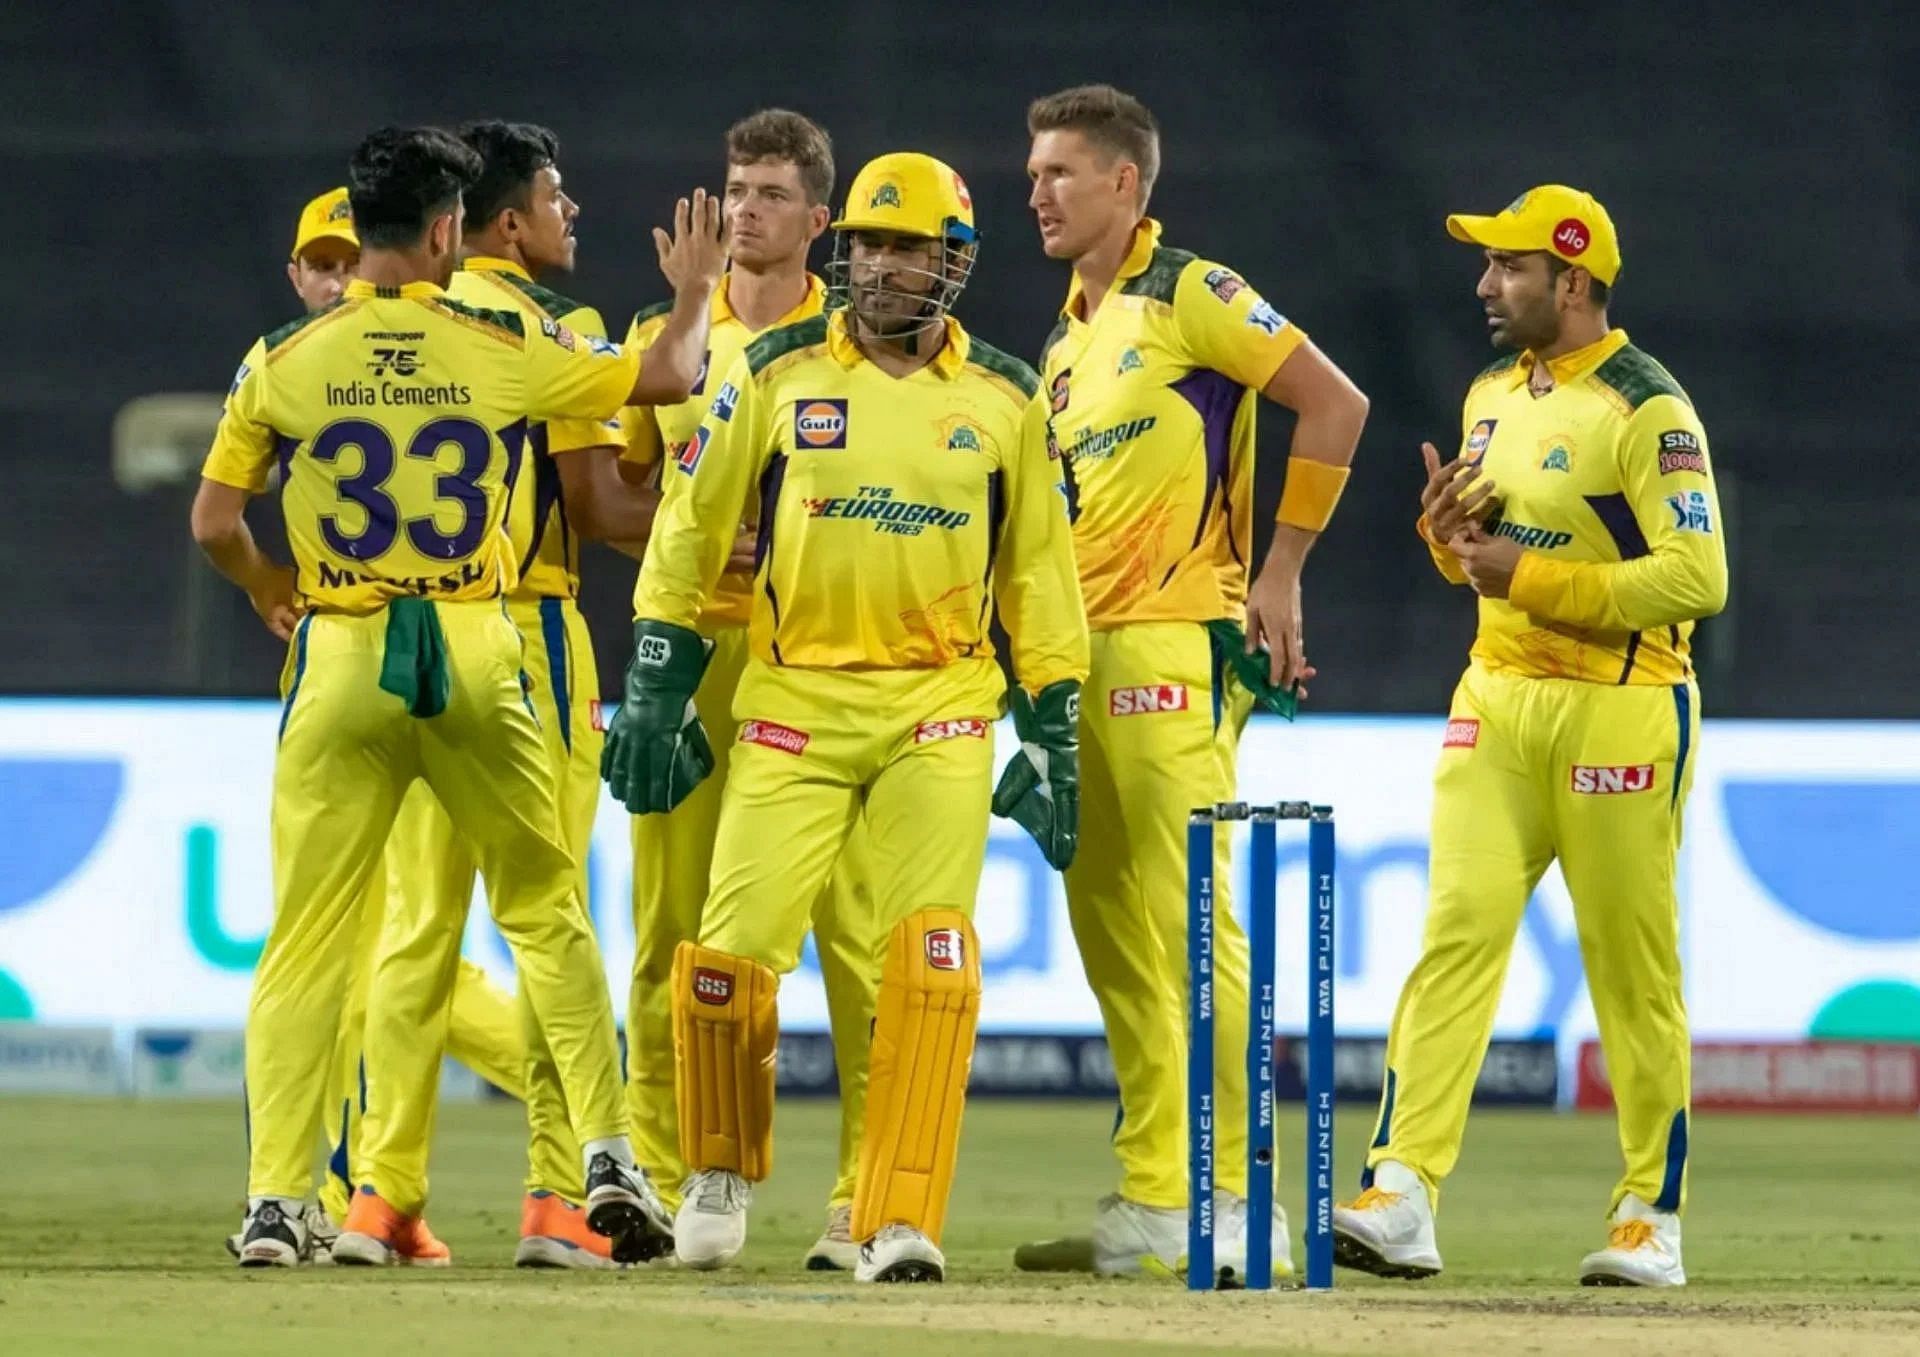 The Chennai Super Kings will hope that MS Dhoni is fit and available for the IPL 2023 opener. [P/C: iplt20.com]